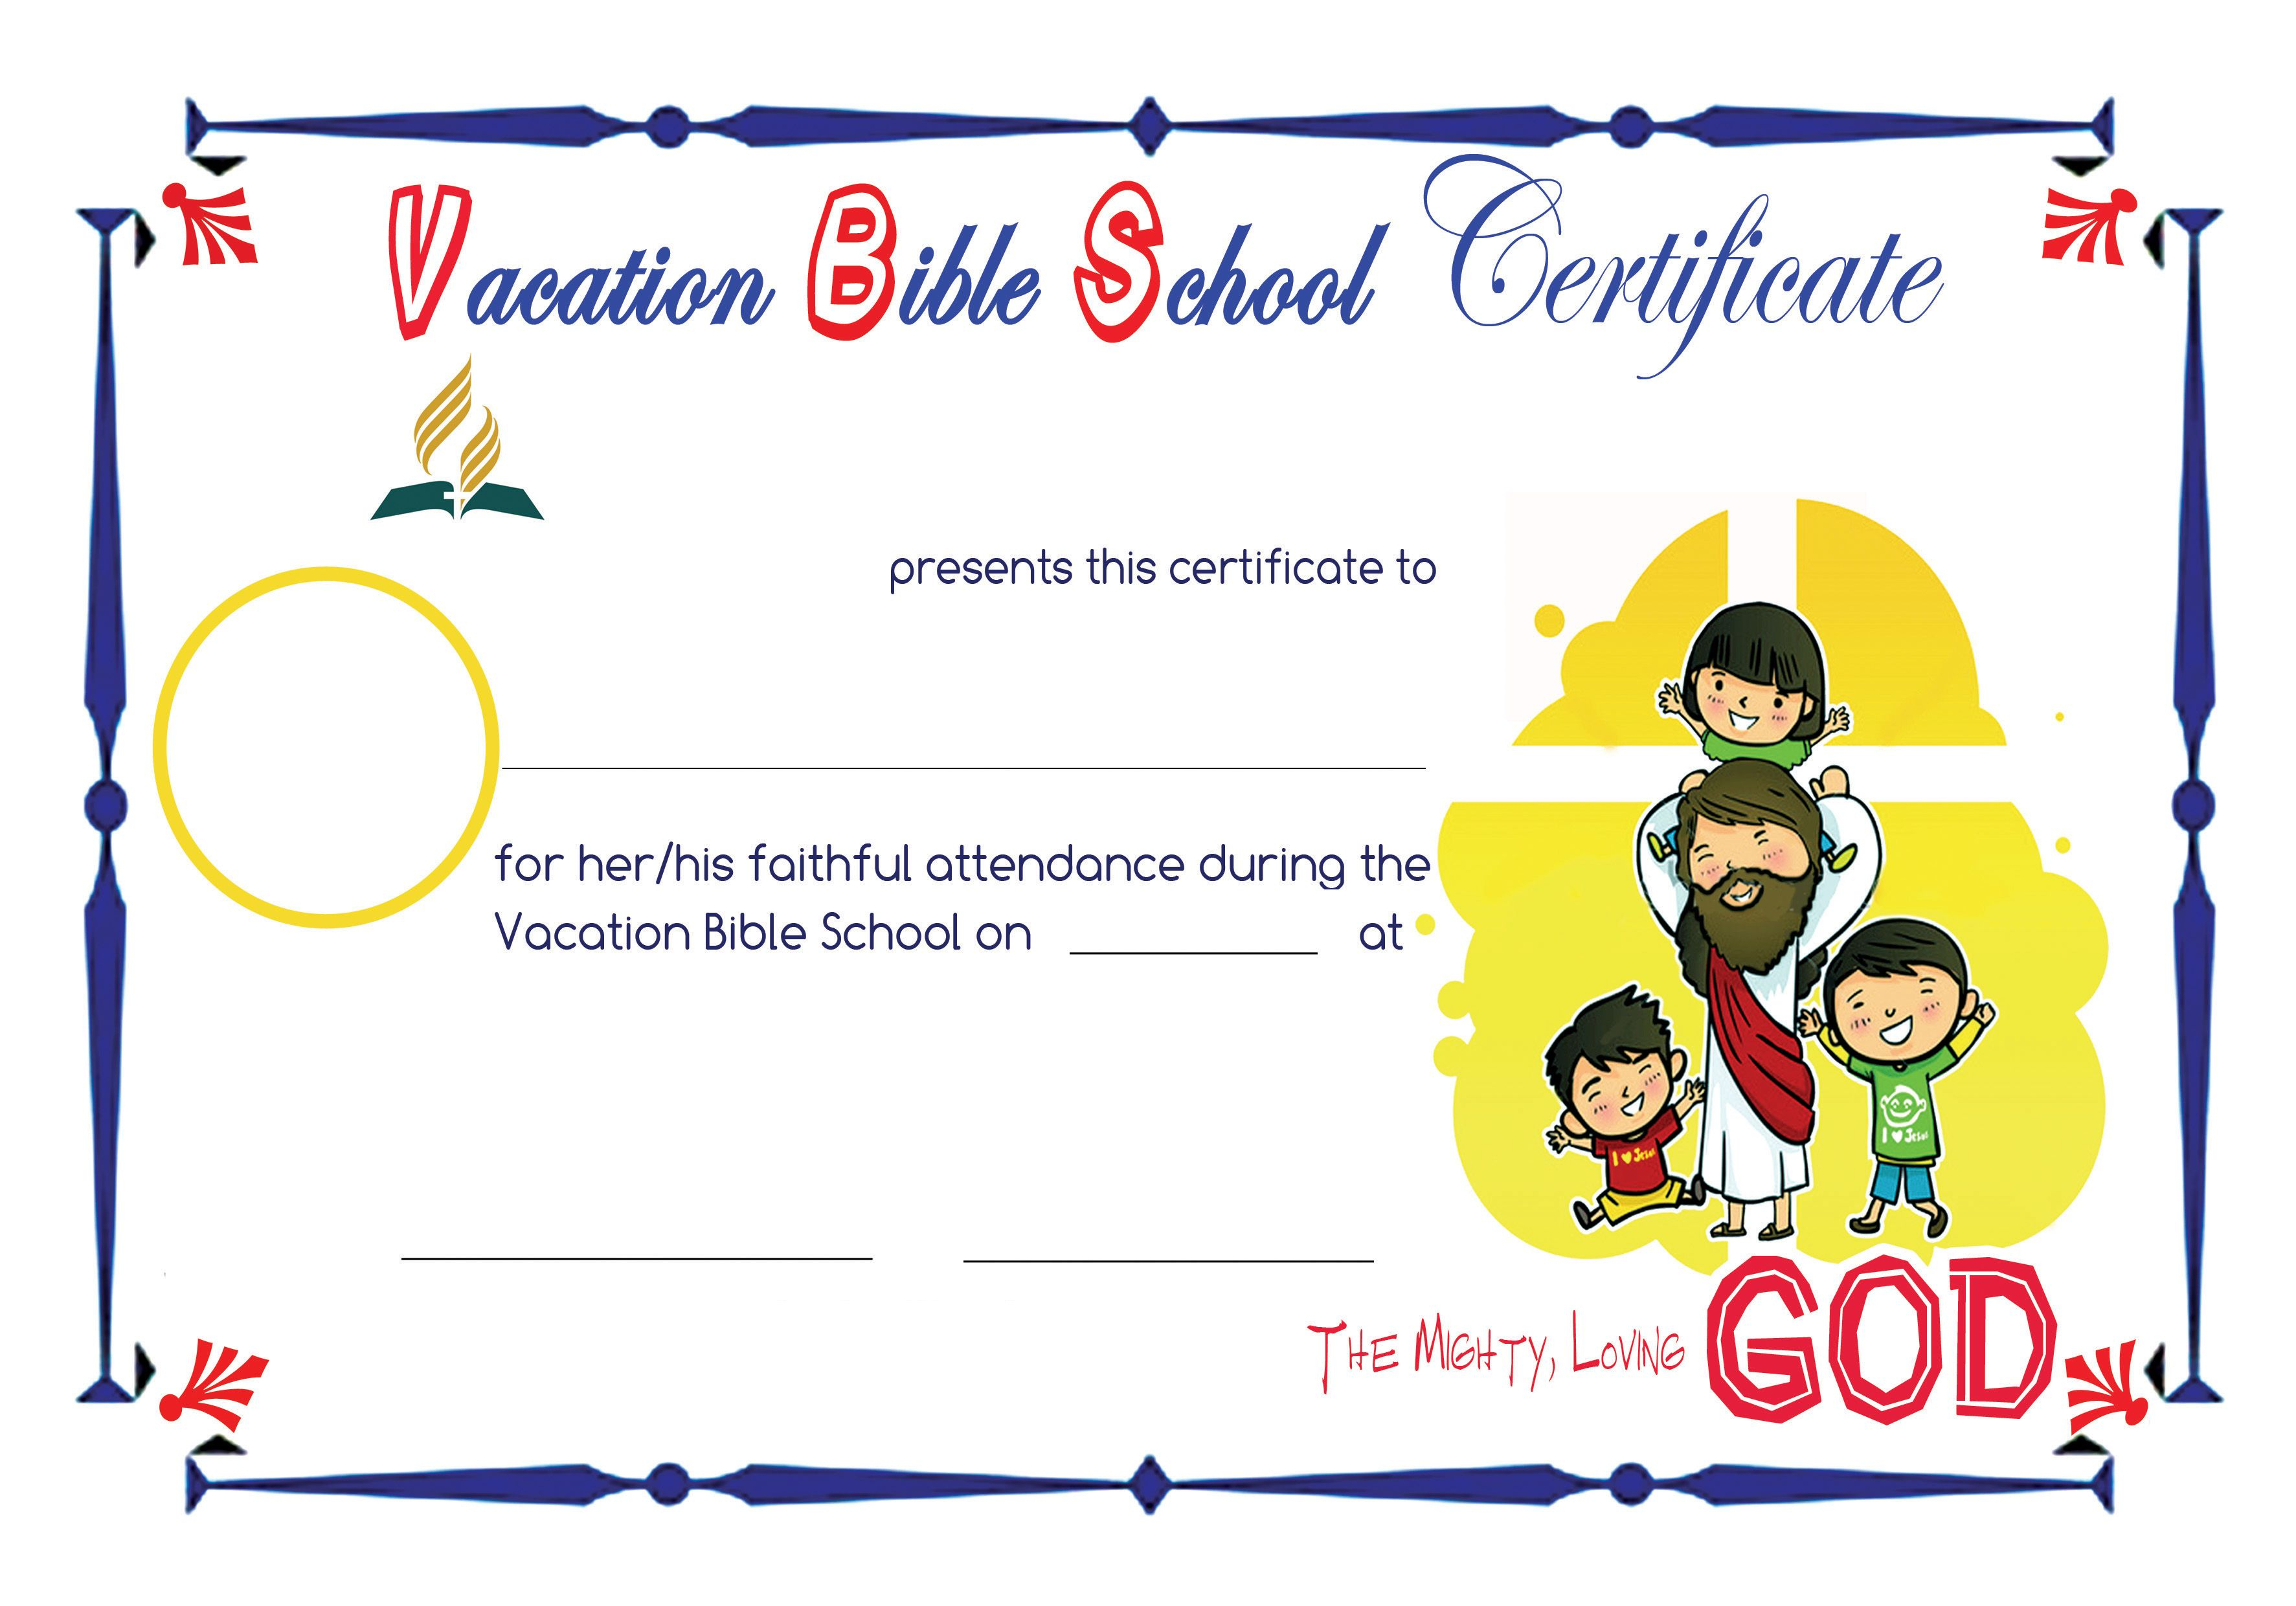 Bible School Certificates Pictures To Pin On Pinterest - Pinsdaddy with Vbs Certificate Template